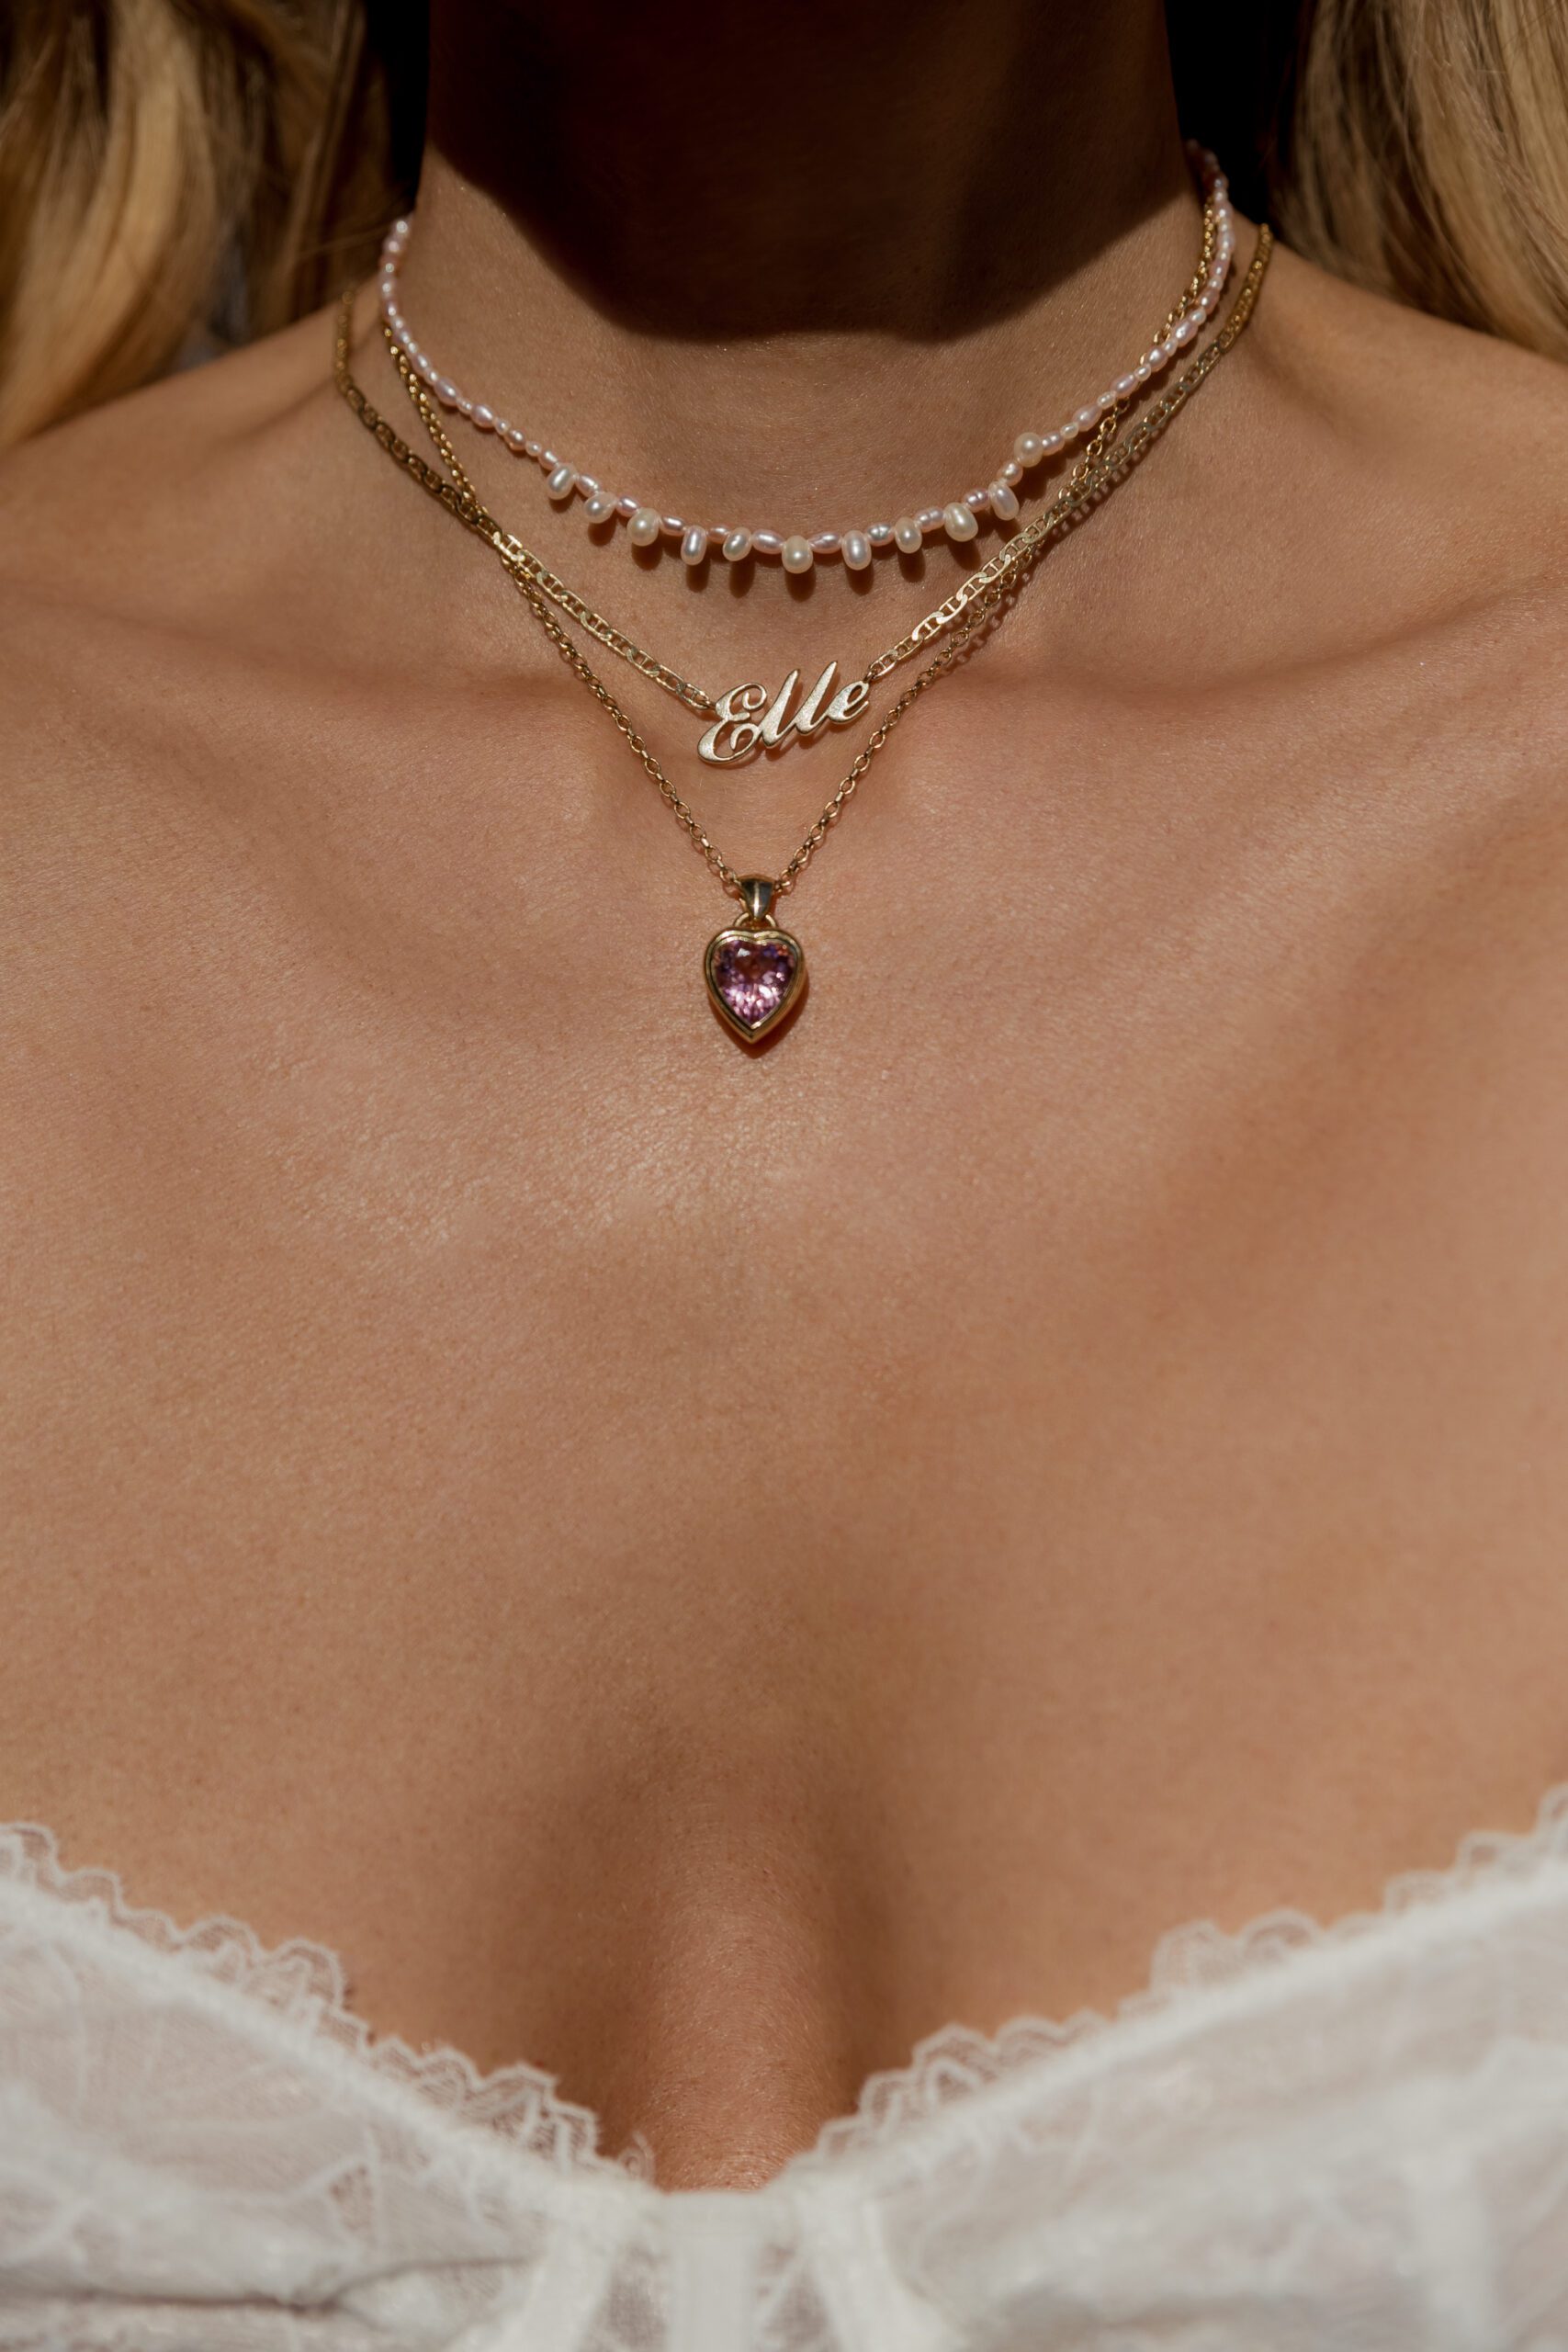 Dream Drop Petite and Pink Pearl Necklace